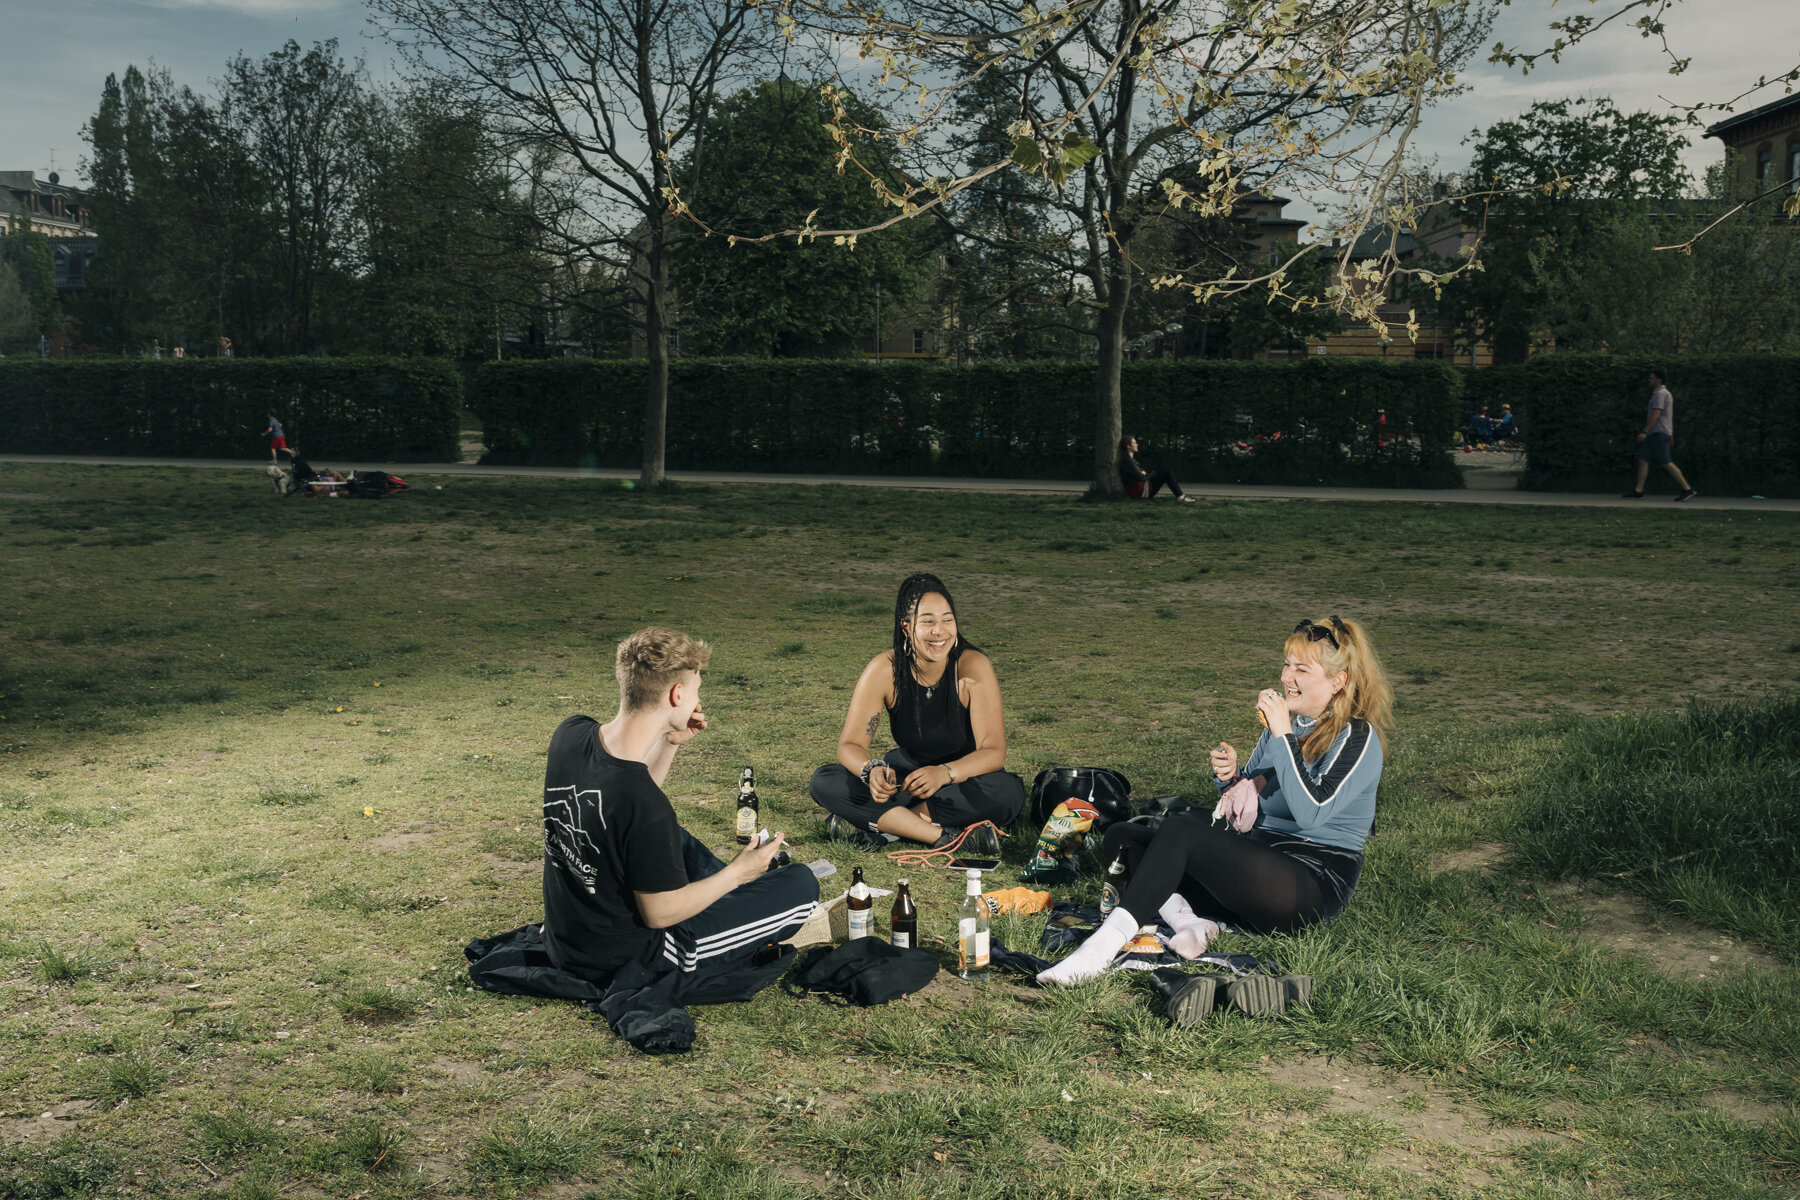  Lennart, Modia and Lotte are friends since years. After beeing locked up in lockdown for many weeks, in May they start meeting again outside to play cards and hang around. 